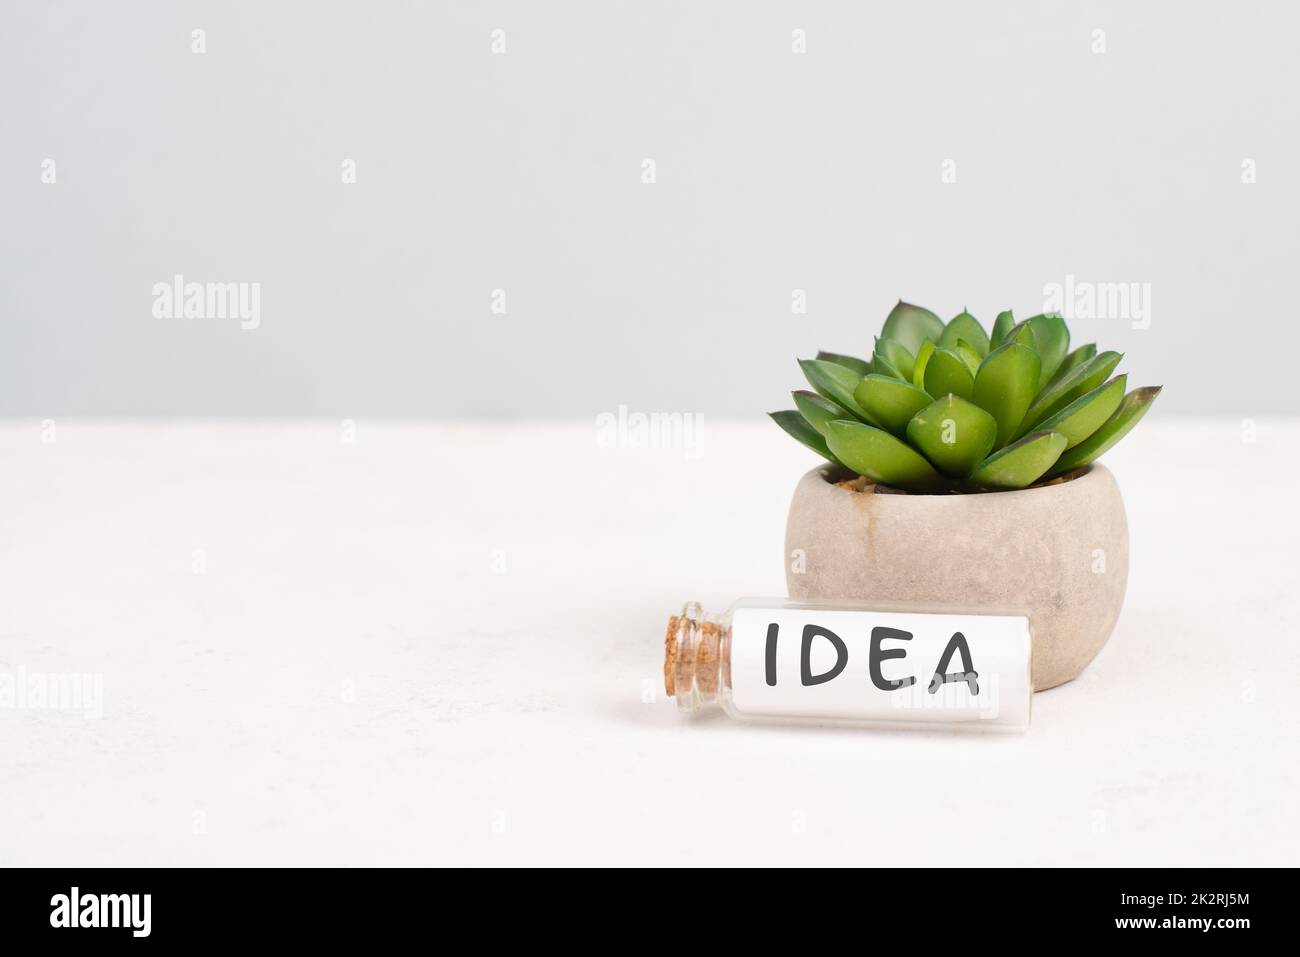 Cactus with the word idea standing on a bottle, gray background, minimalistic desk, brainstorming for a start up, being creative Stock Photo